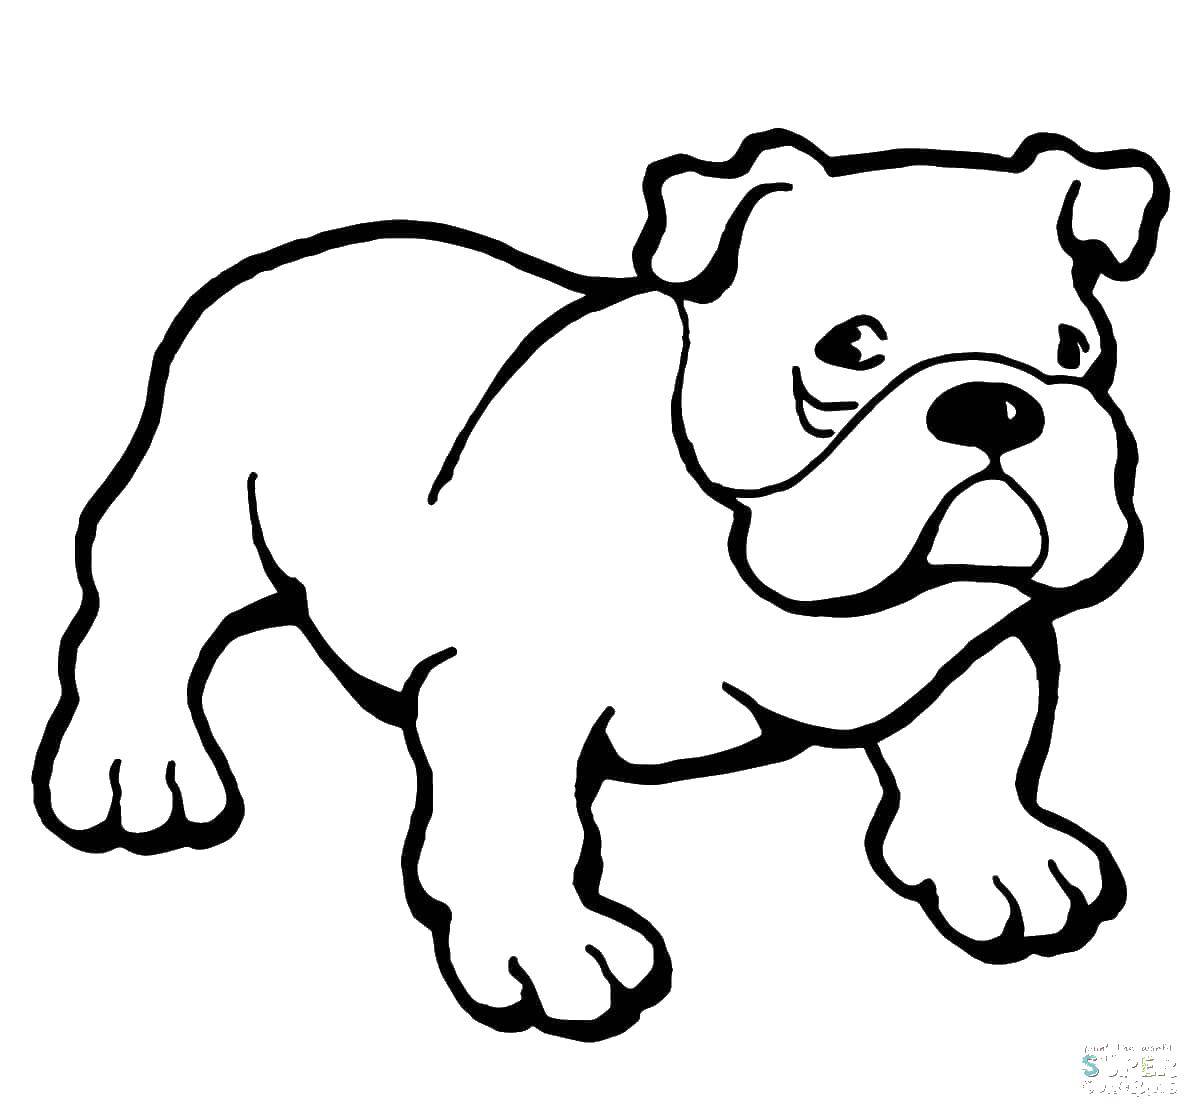 Coloring Dog. Category Pets allowed. Tags:  Pets, dogs, dog.